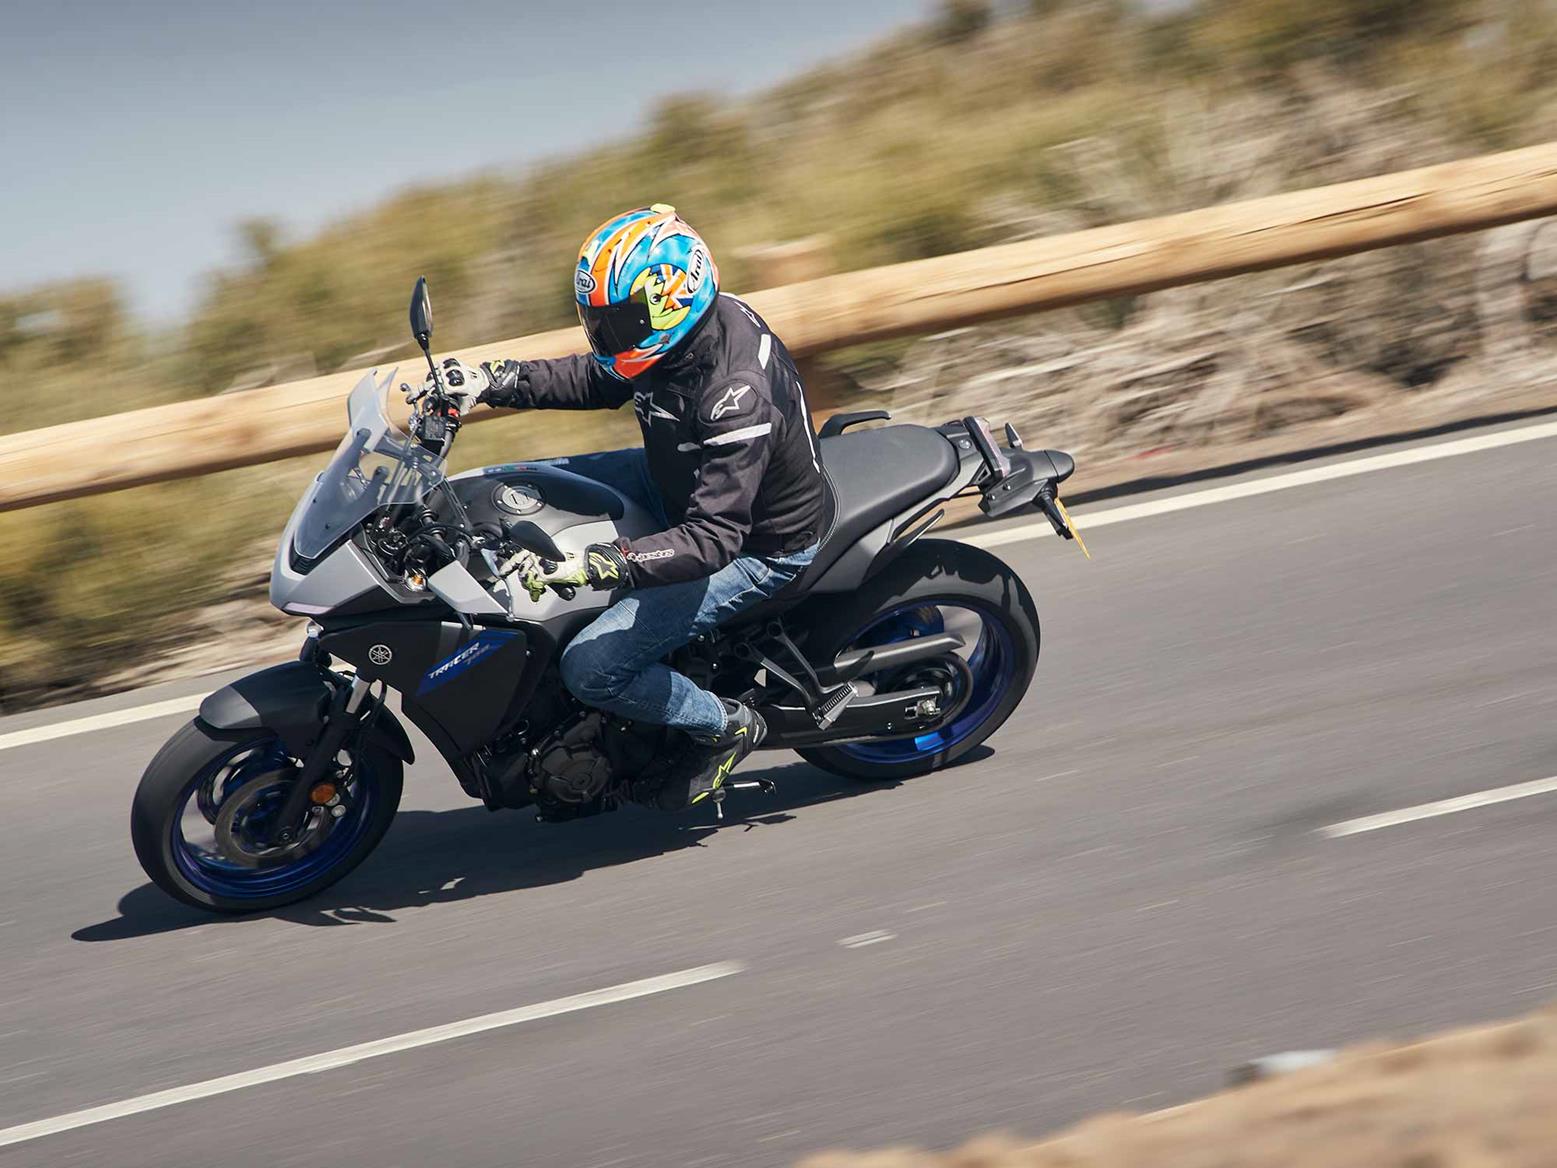 New 2019 Yamaha Tracer 700 GT Unveiled in Germany